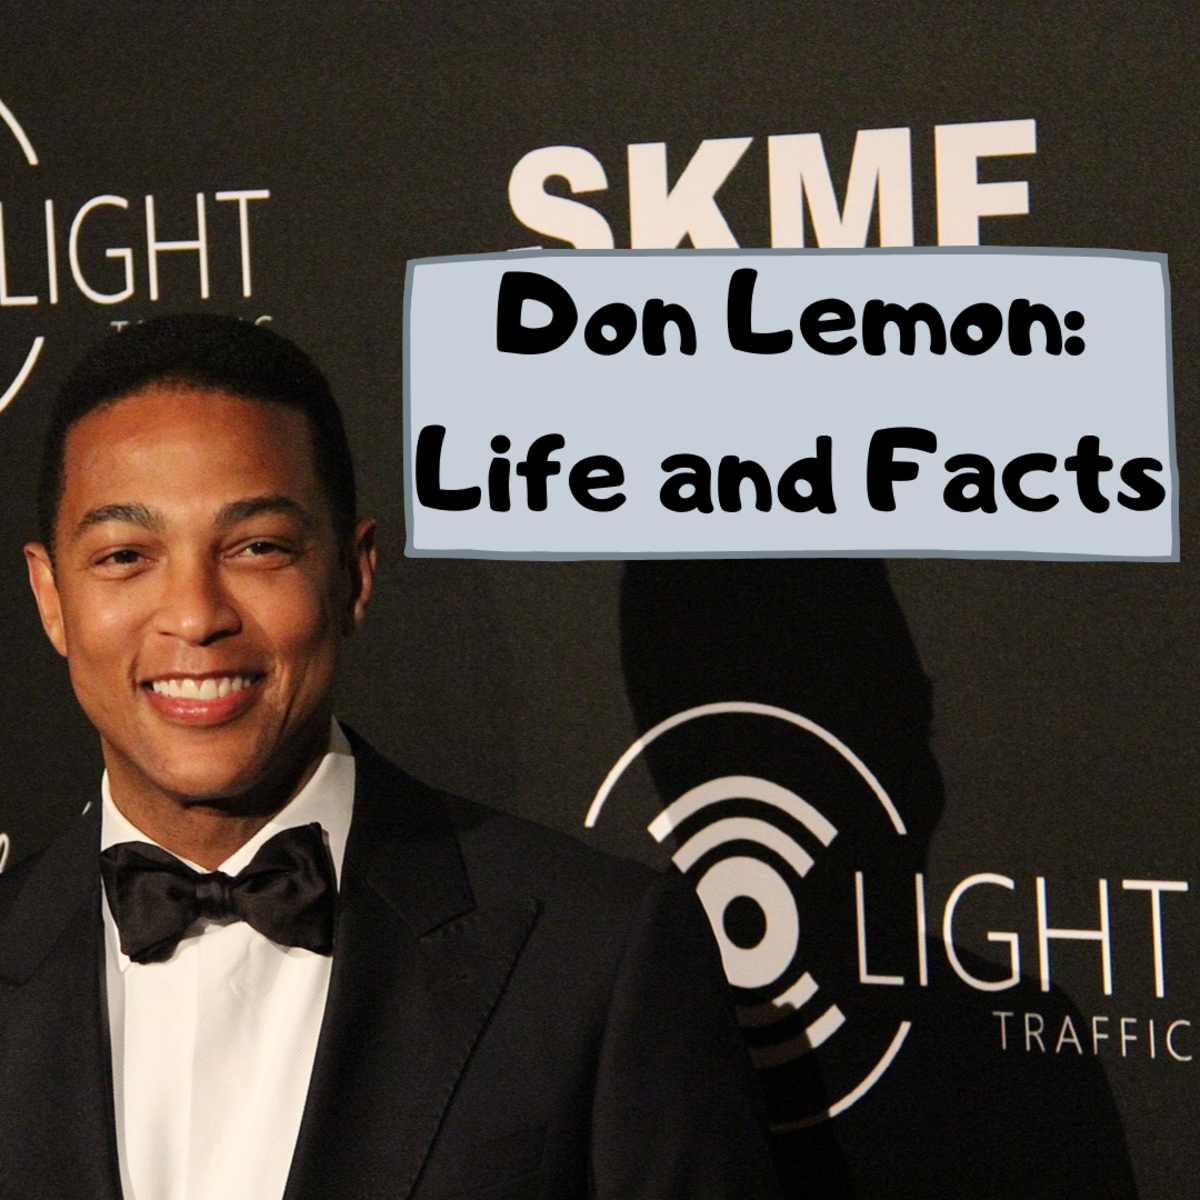 Read on to learn all about political host Don Lemon's life.